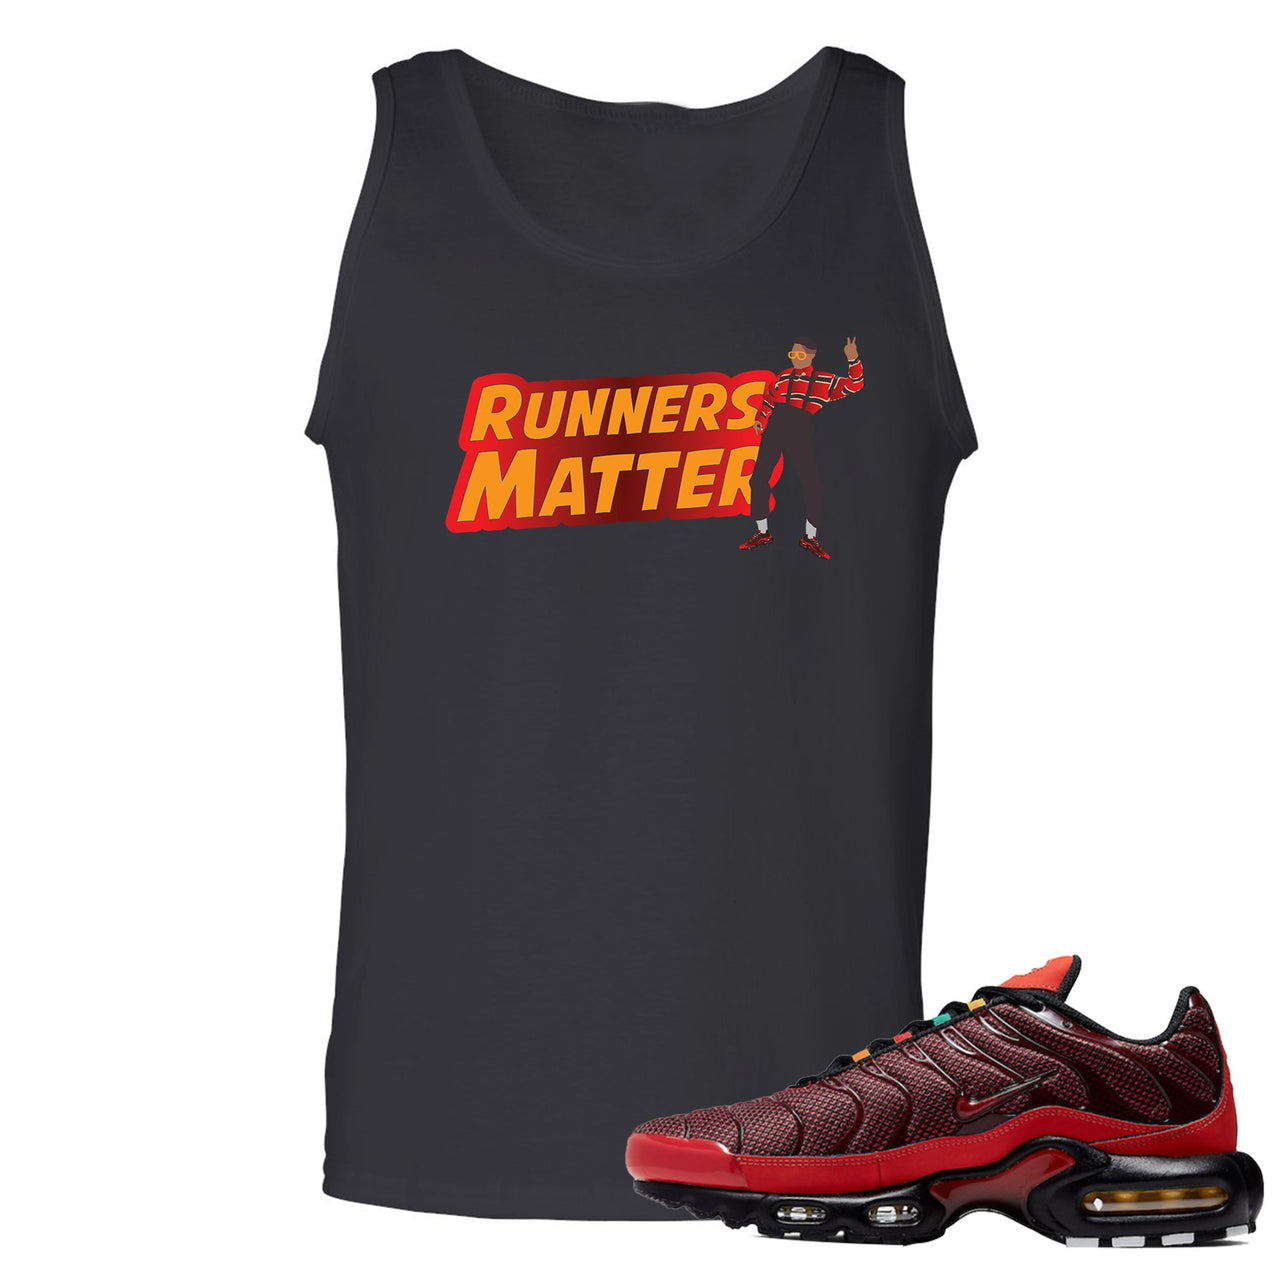 printed on the front of the air max plus sunburst sneaker matching black tank top is the runners matter logo